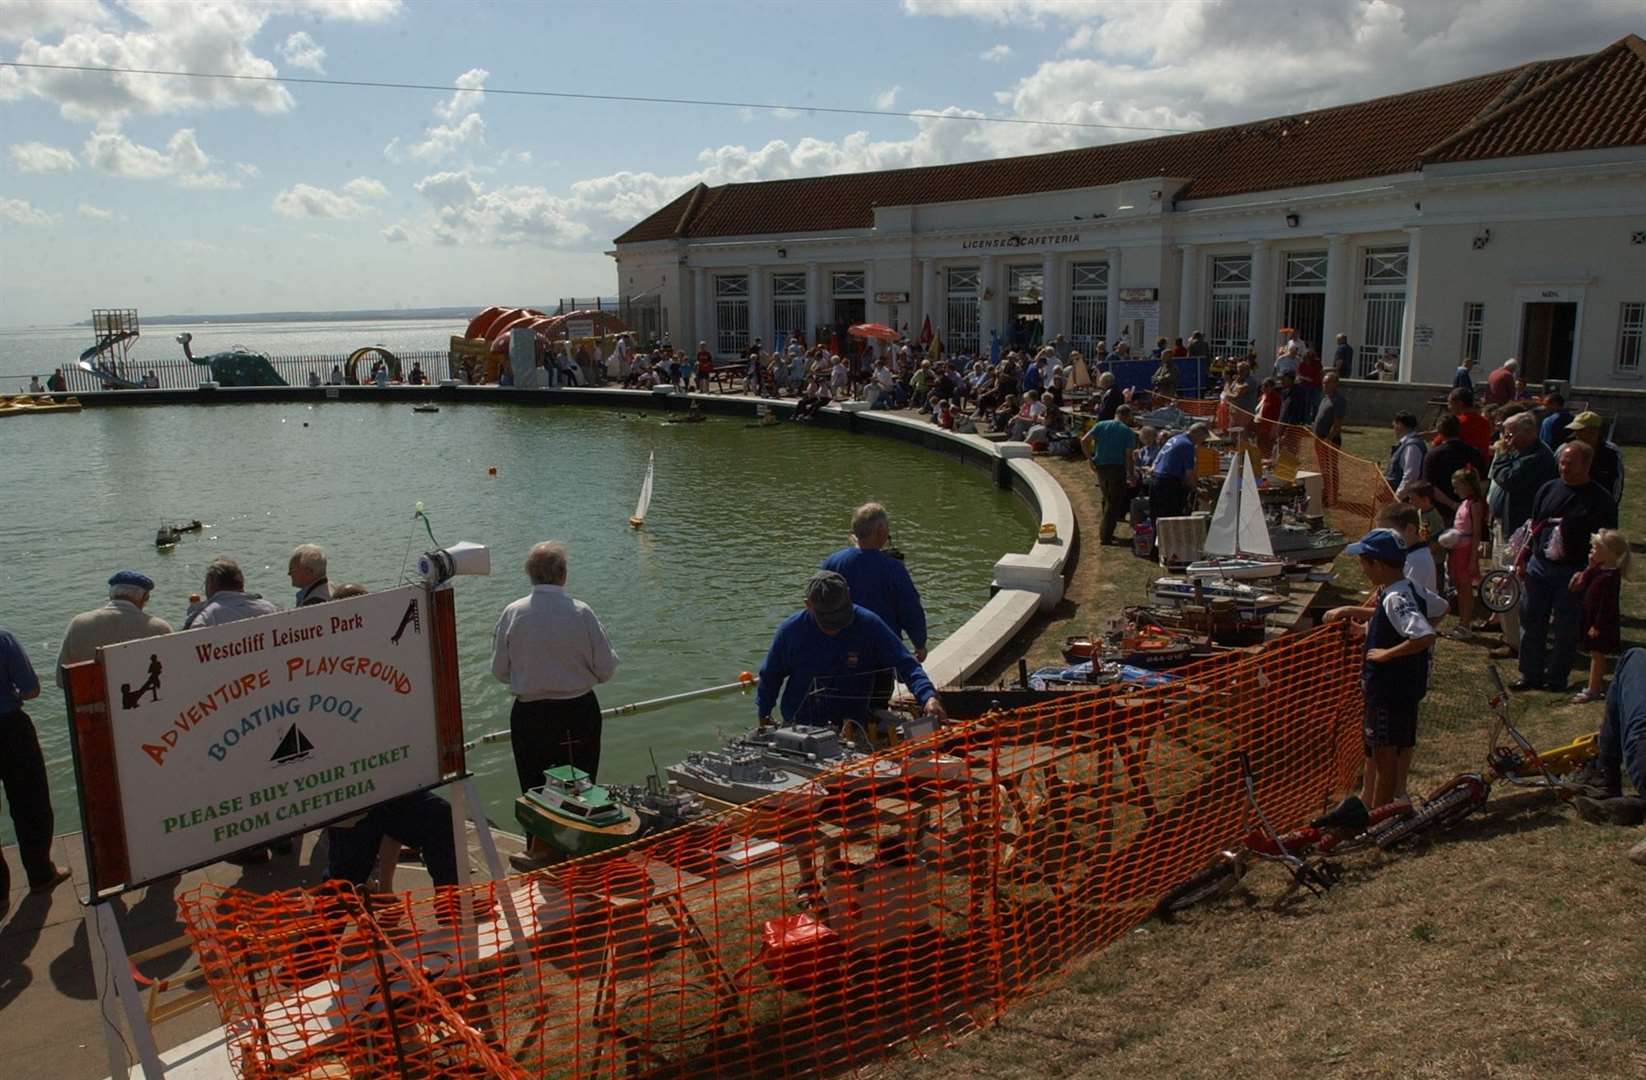 The lease of Ramsgate boating pool is for sale. Picture by Matt McArdle.